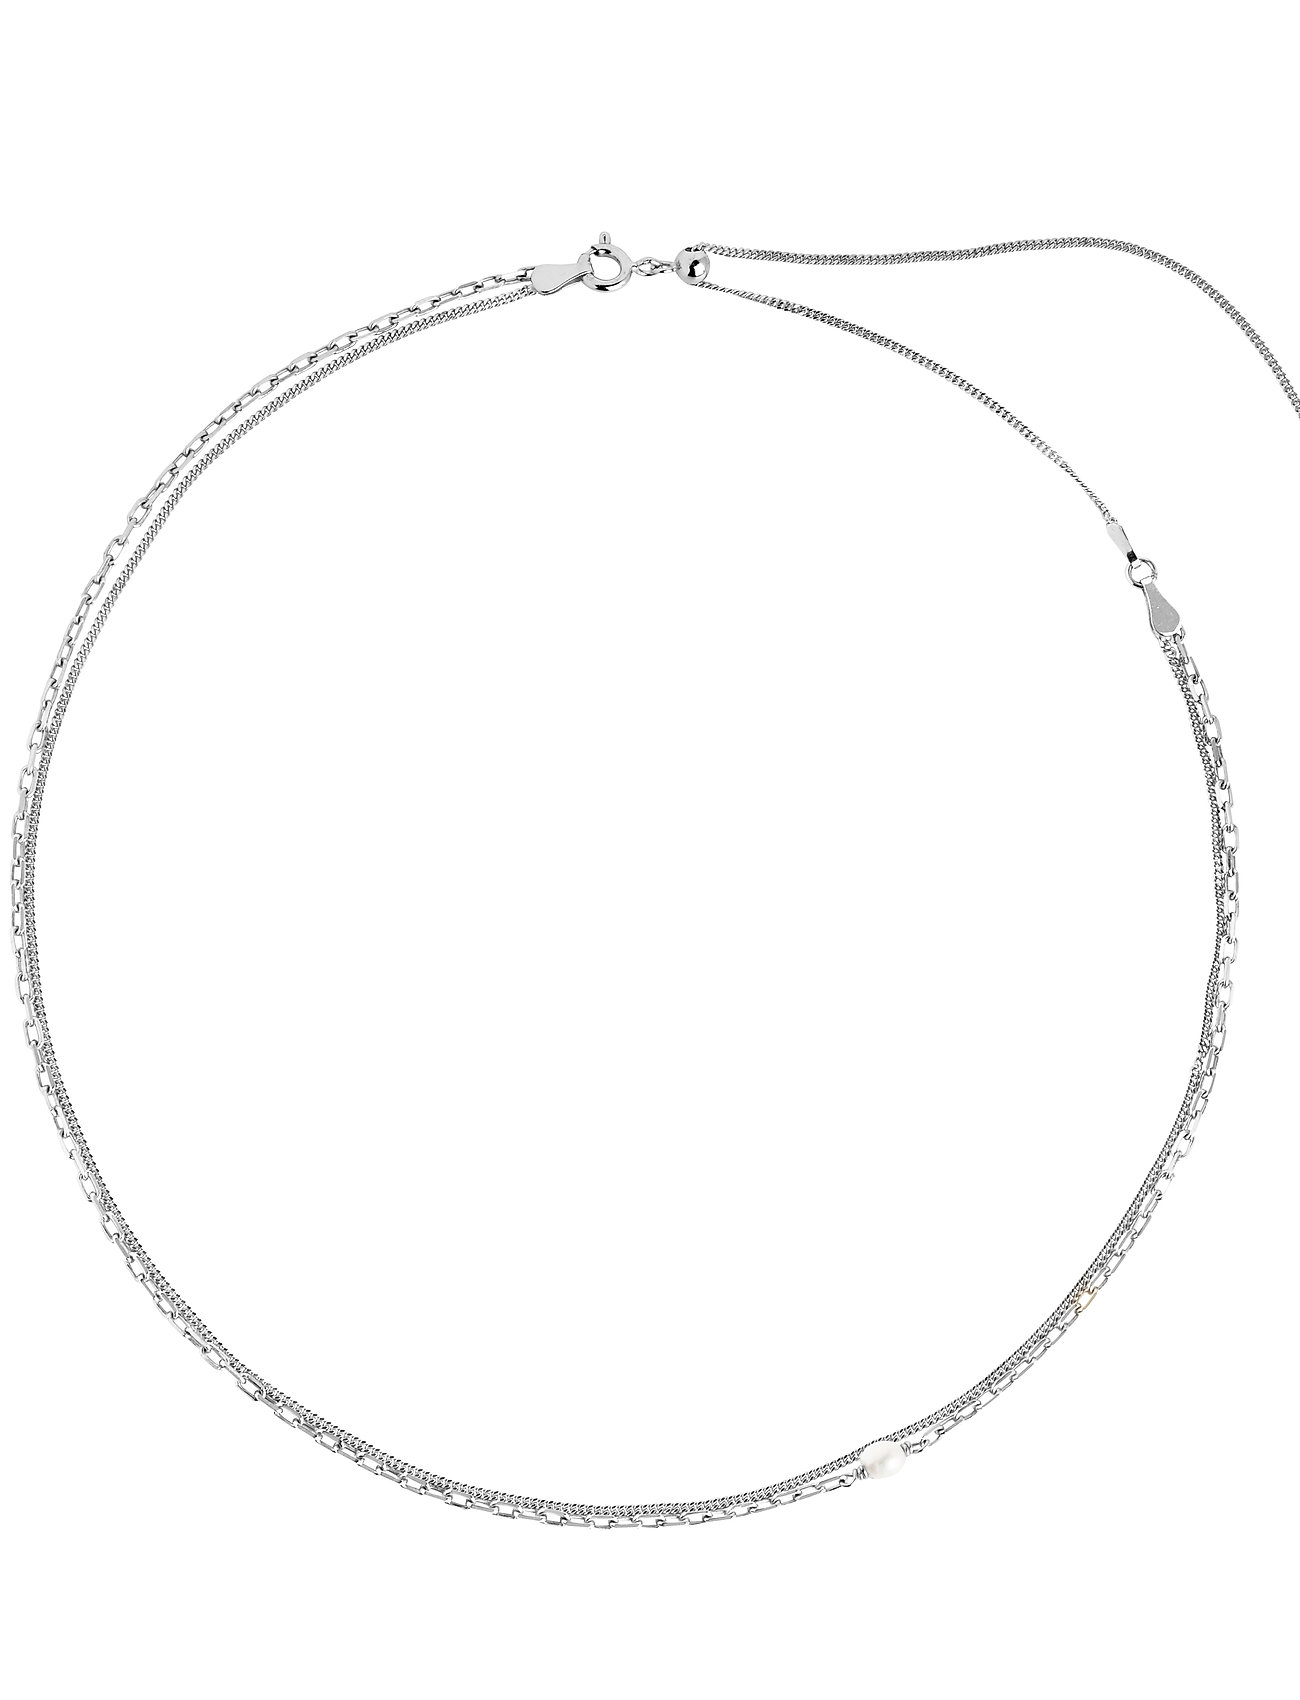 Maria Black - Cantare Necklace - parelketting - silver hp - 1